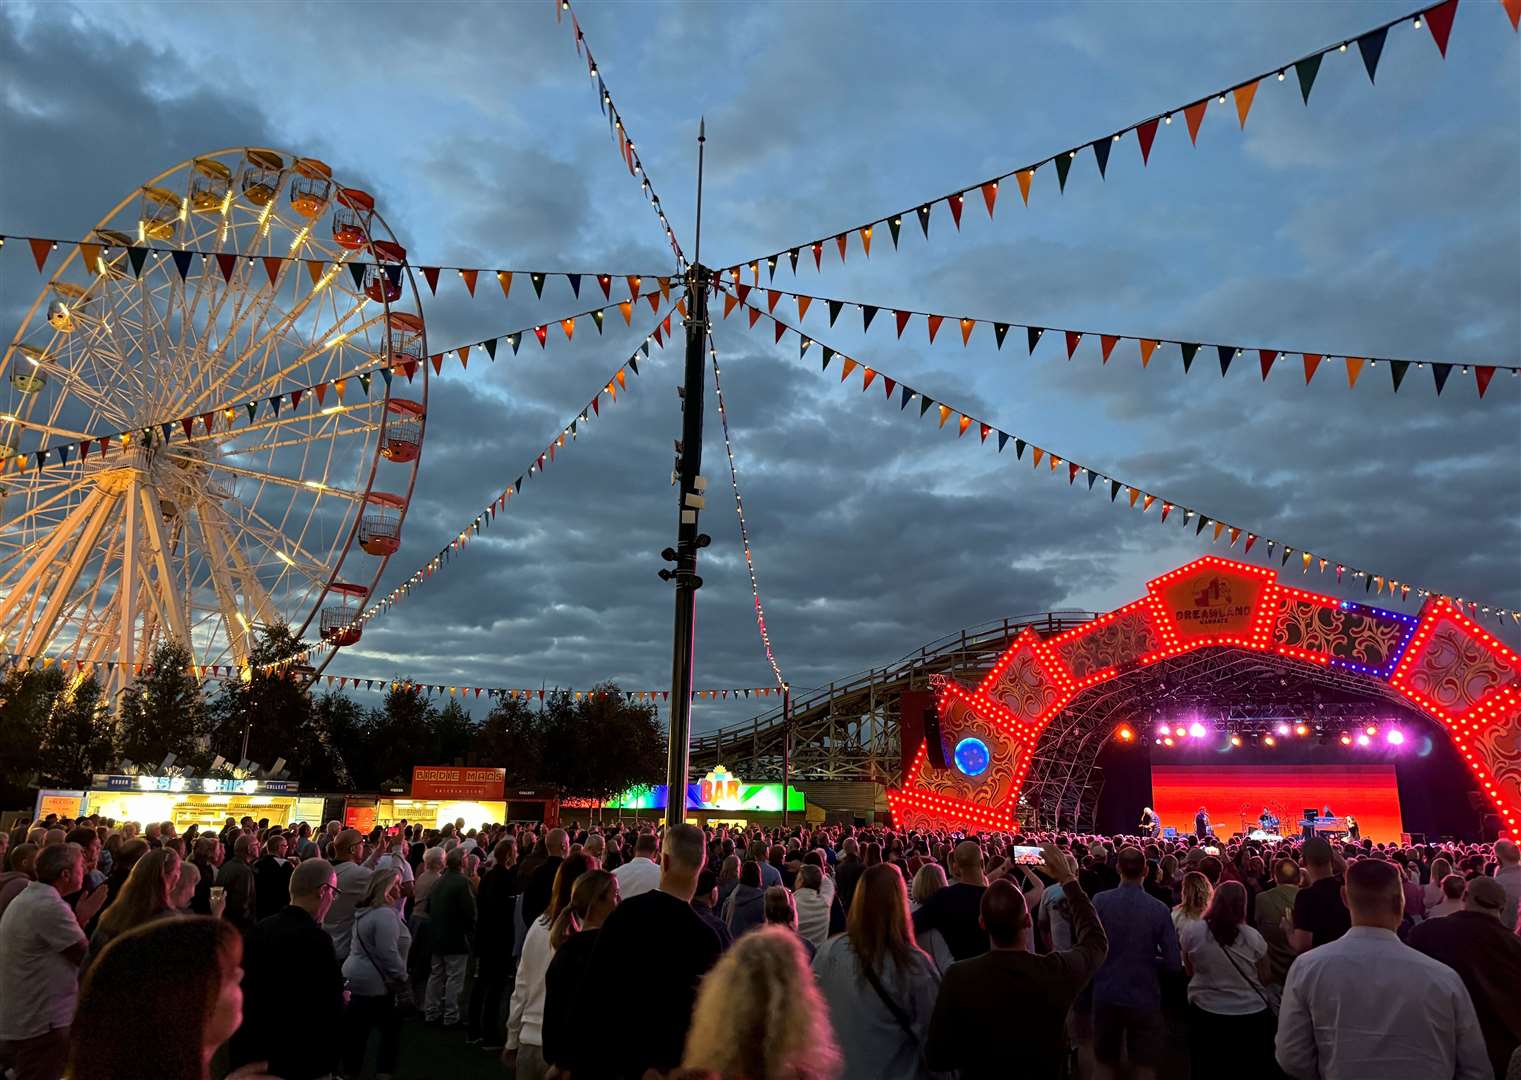 The audience was taken on a trip down memory lane during Deacon Blue’s performance at Dreamland. Picture: Beau Goodwin